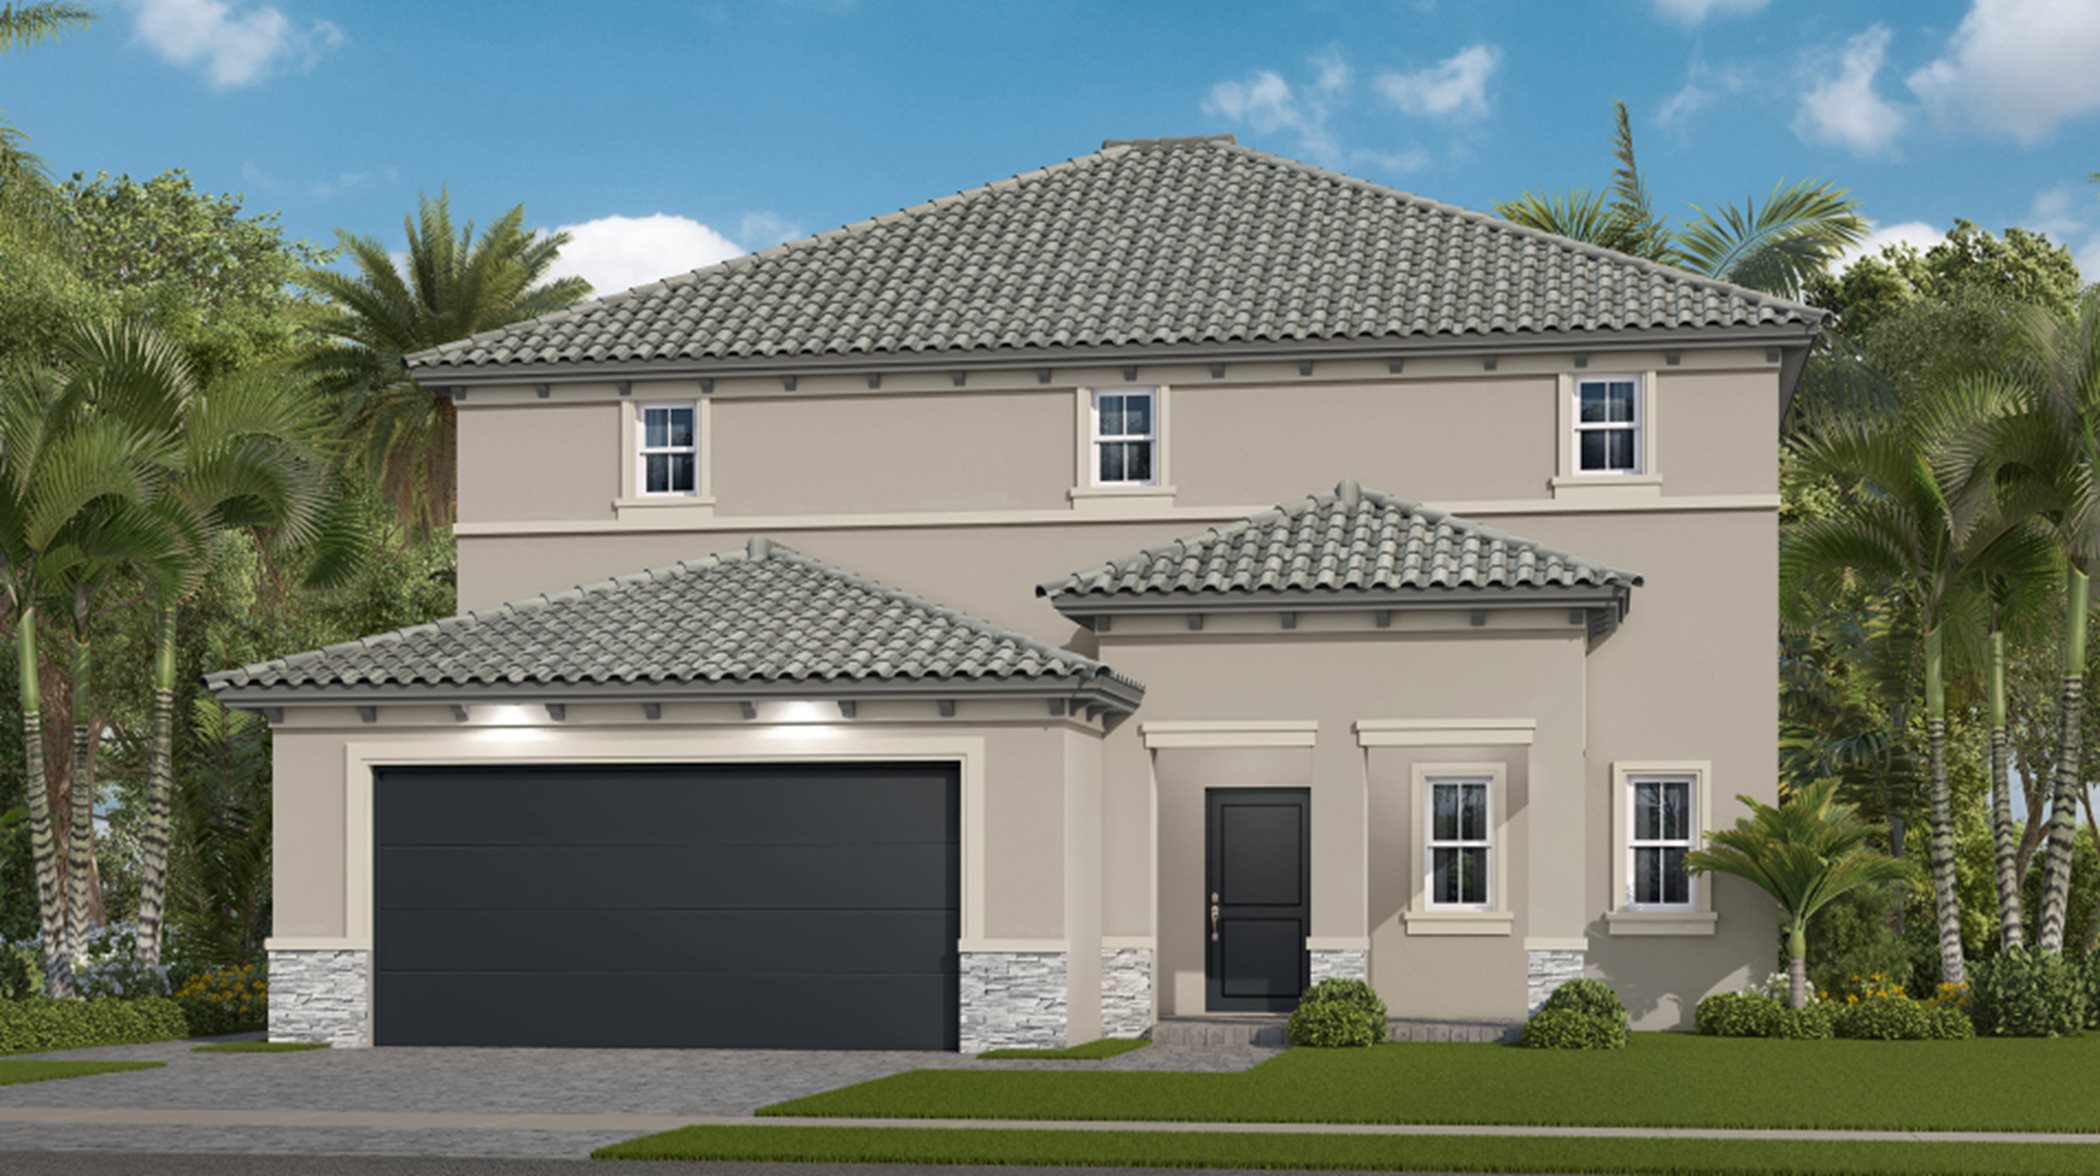 Exterior with A low hipped roofline, stucco siding and stone accents